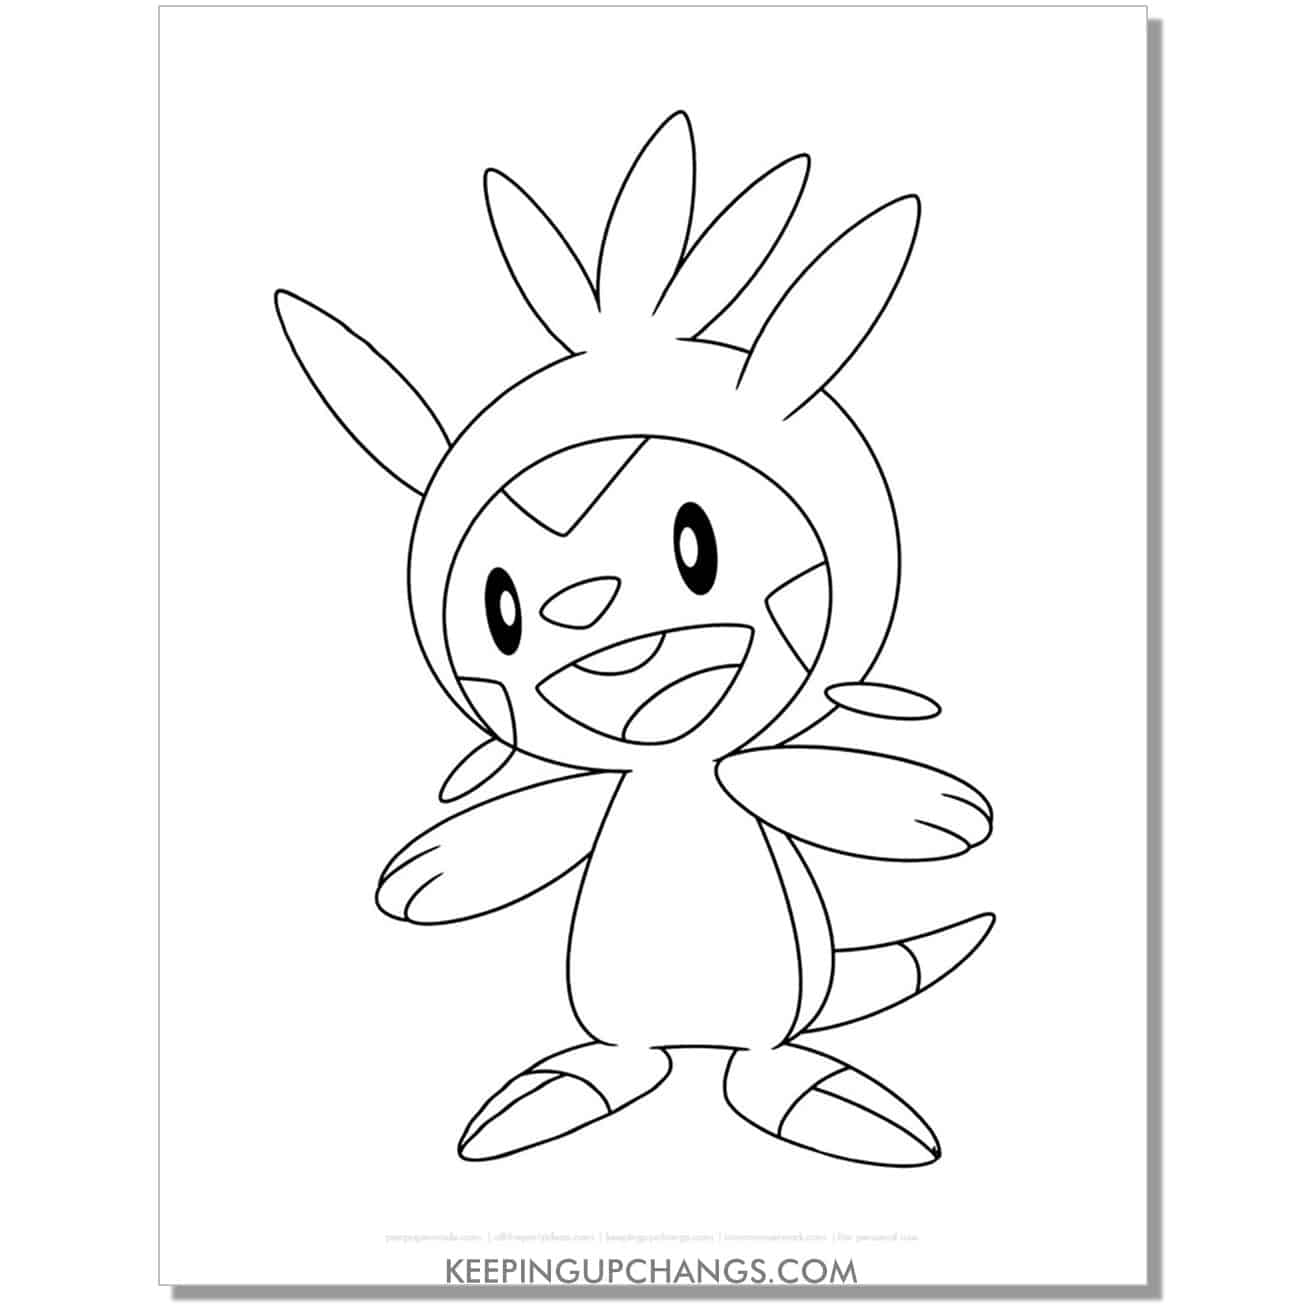 chespin pokemon coloring page, sheet.